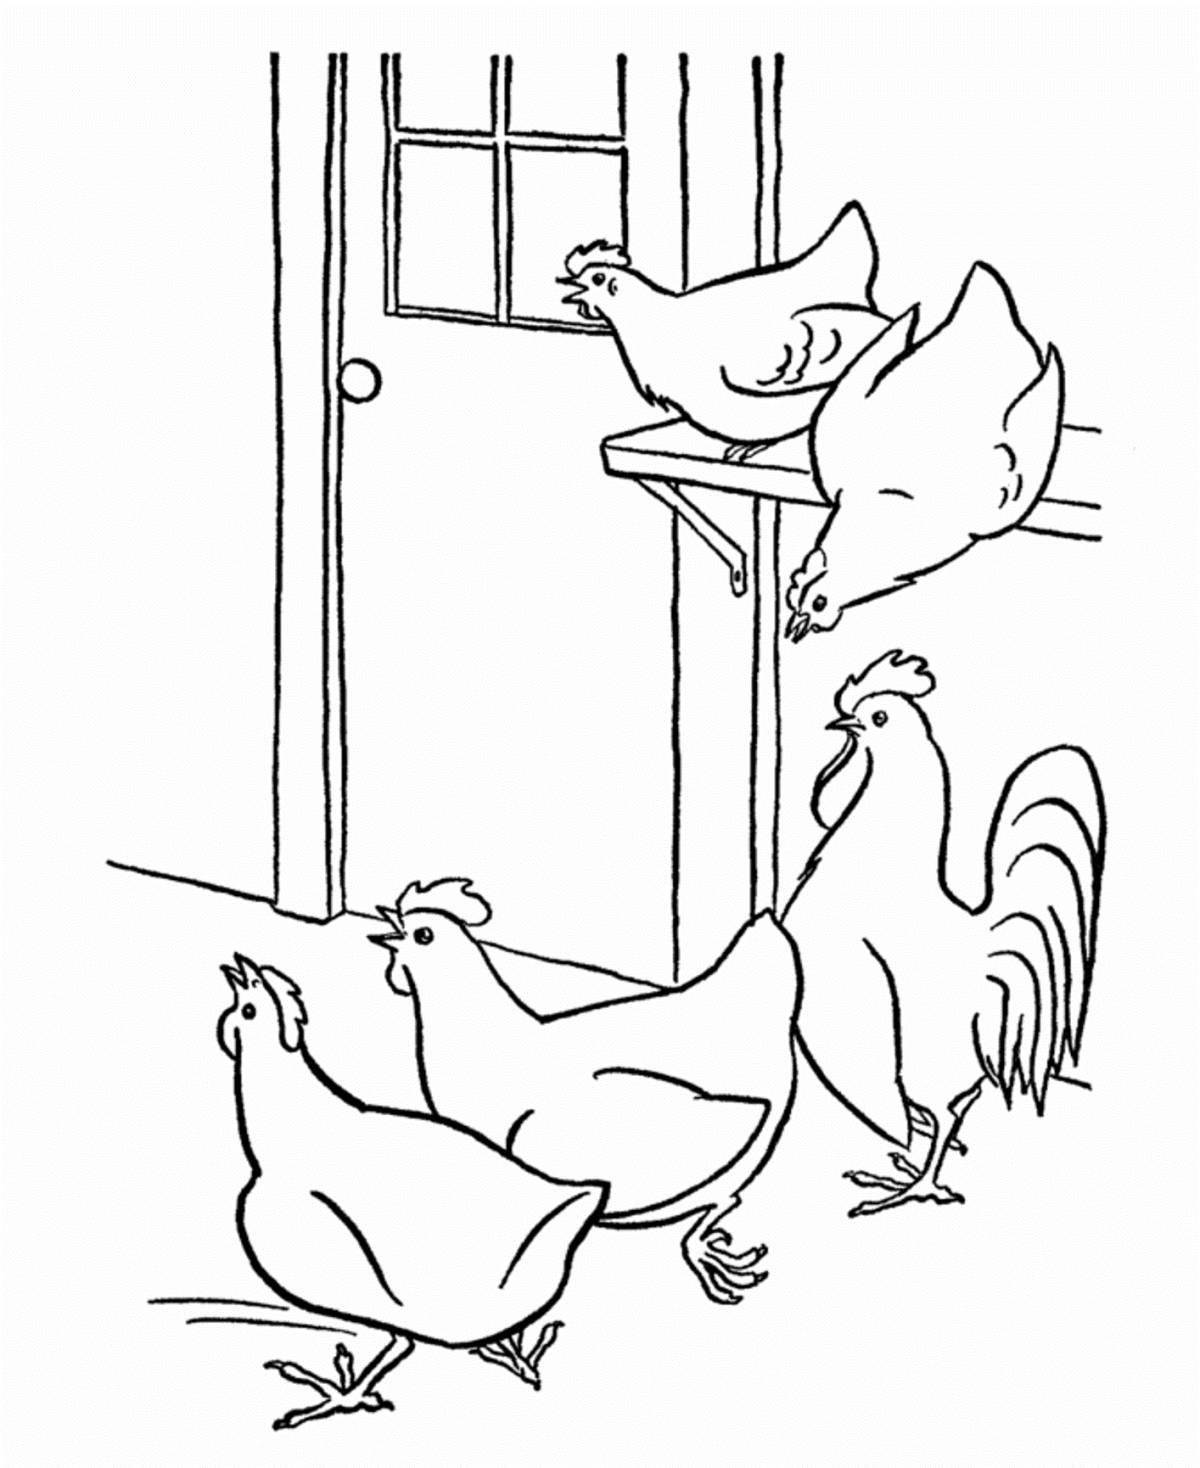 Great chicken coop coloring book for kids